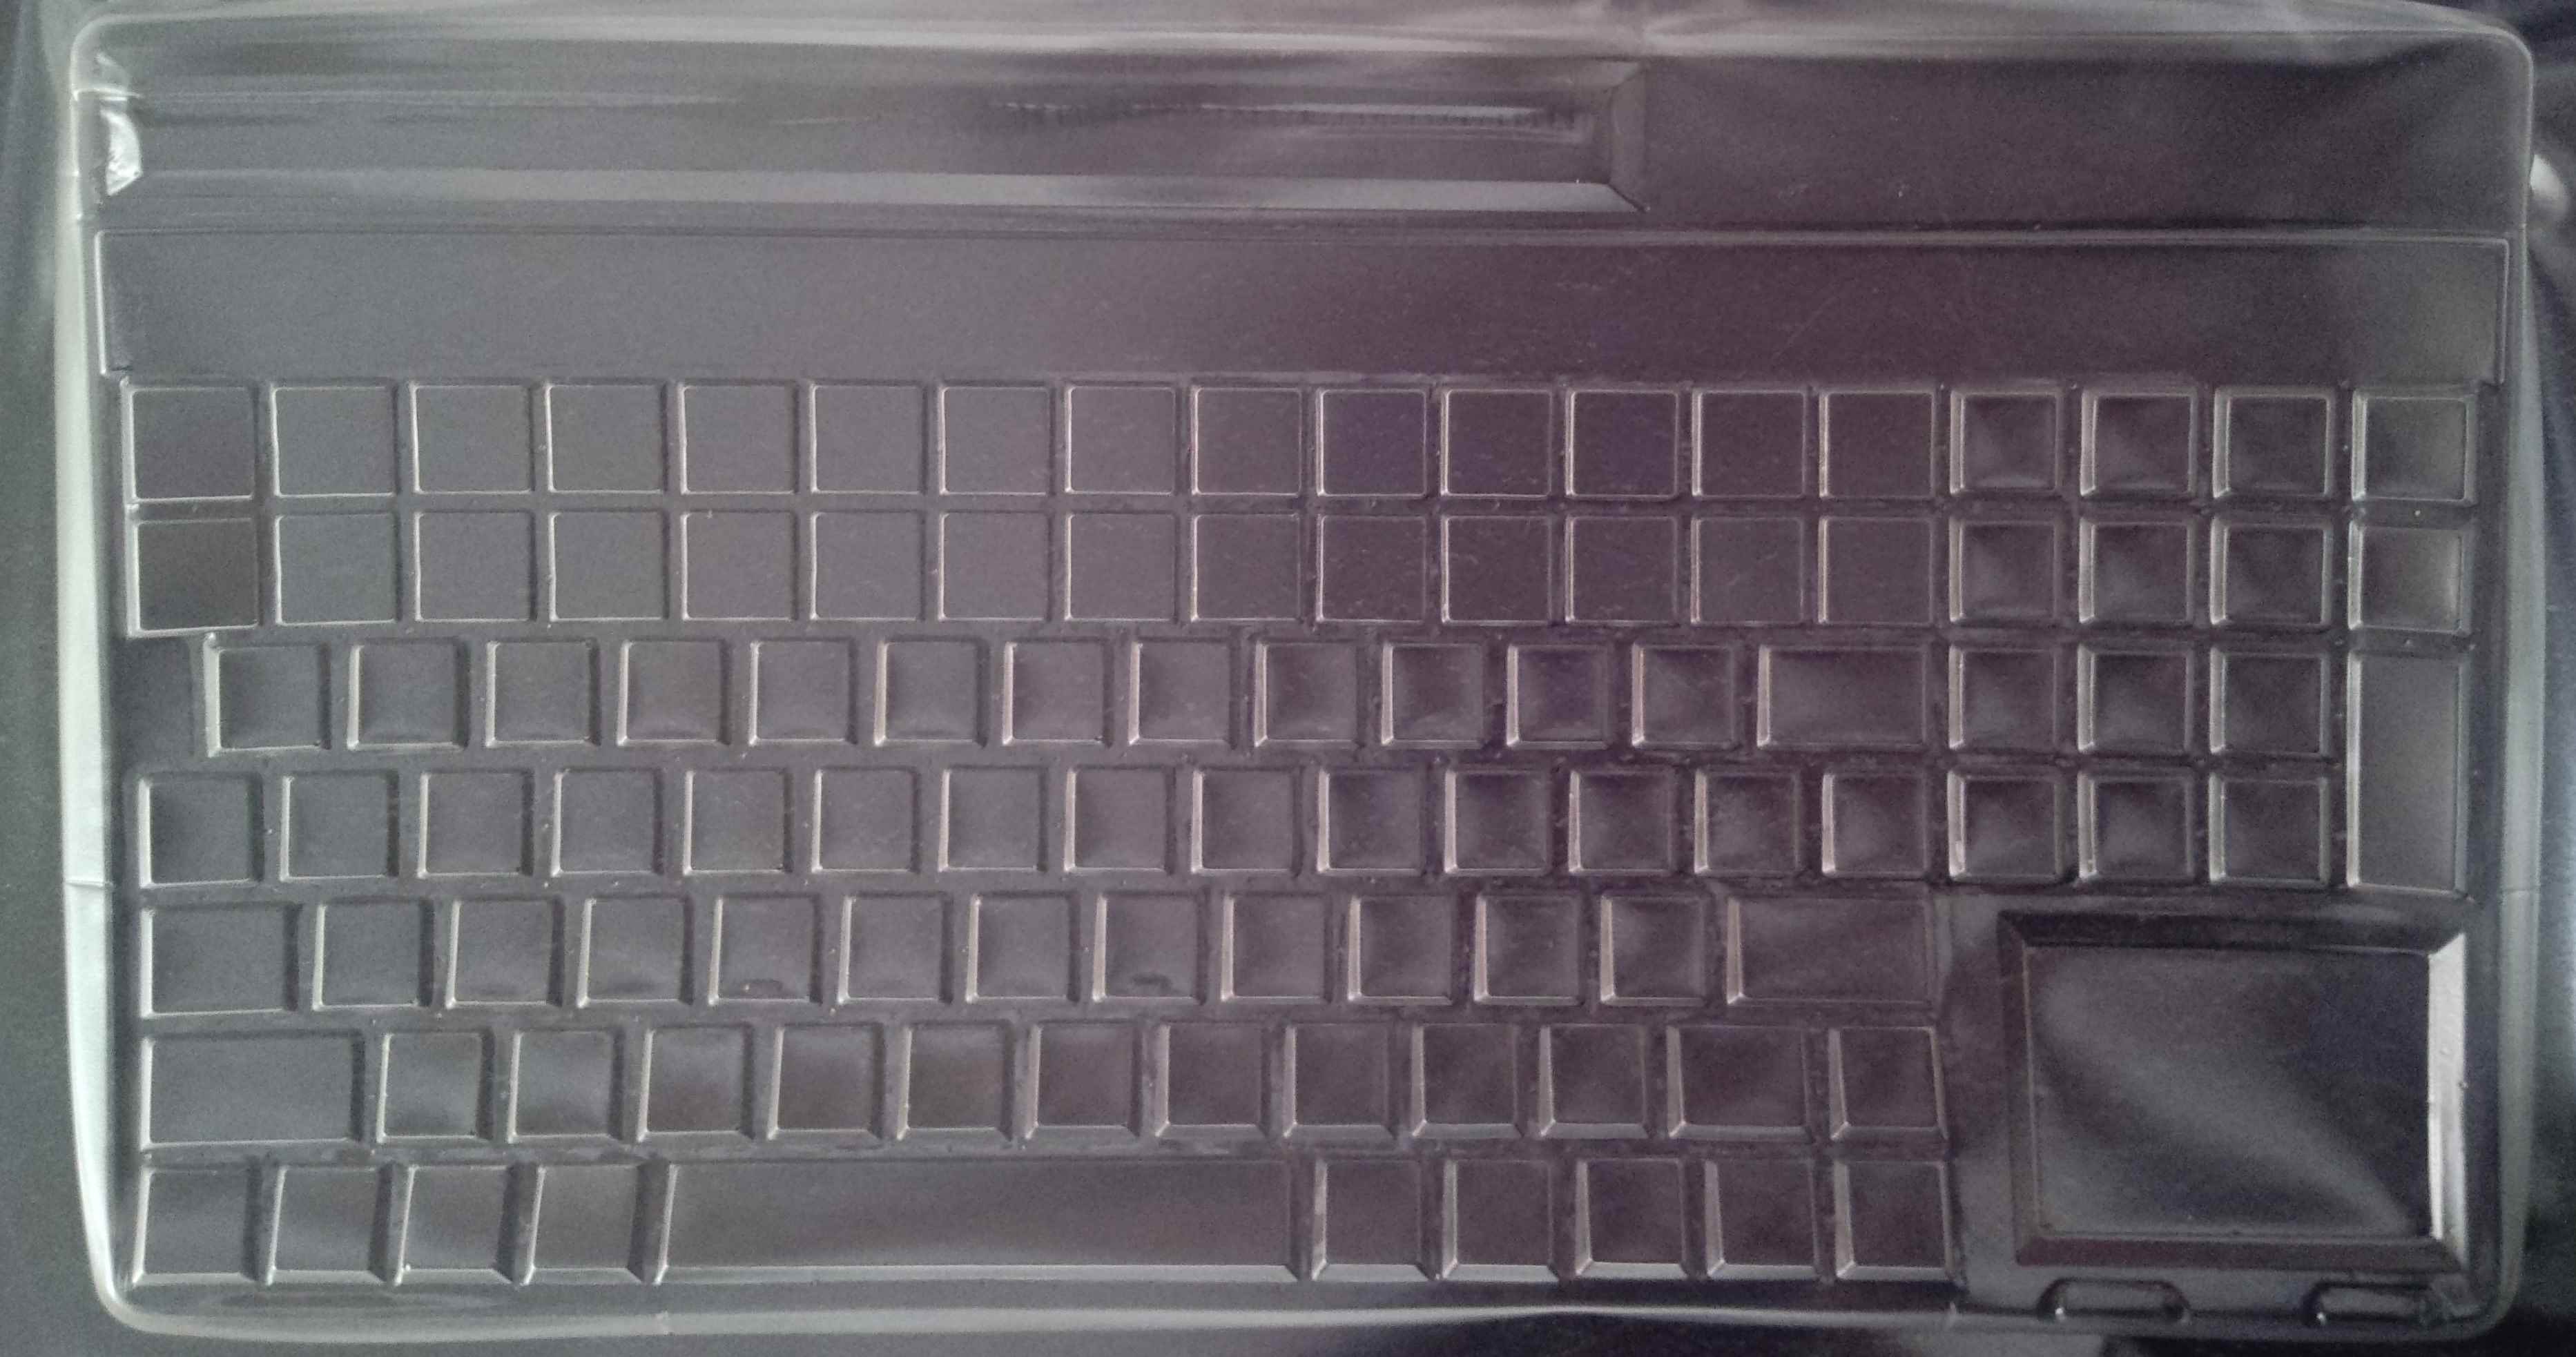 Cherry SPOS , Touch Pad G86-G2411 EVAGASA Keyboard Cover